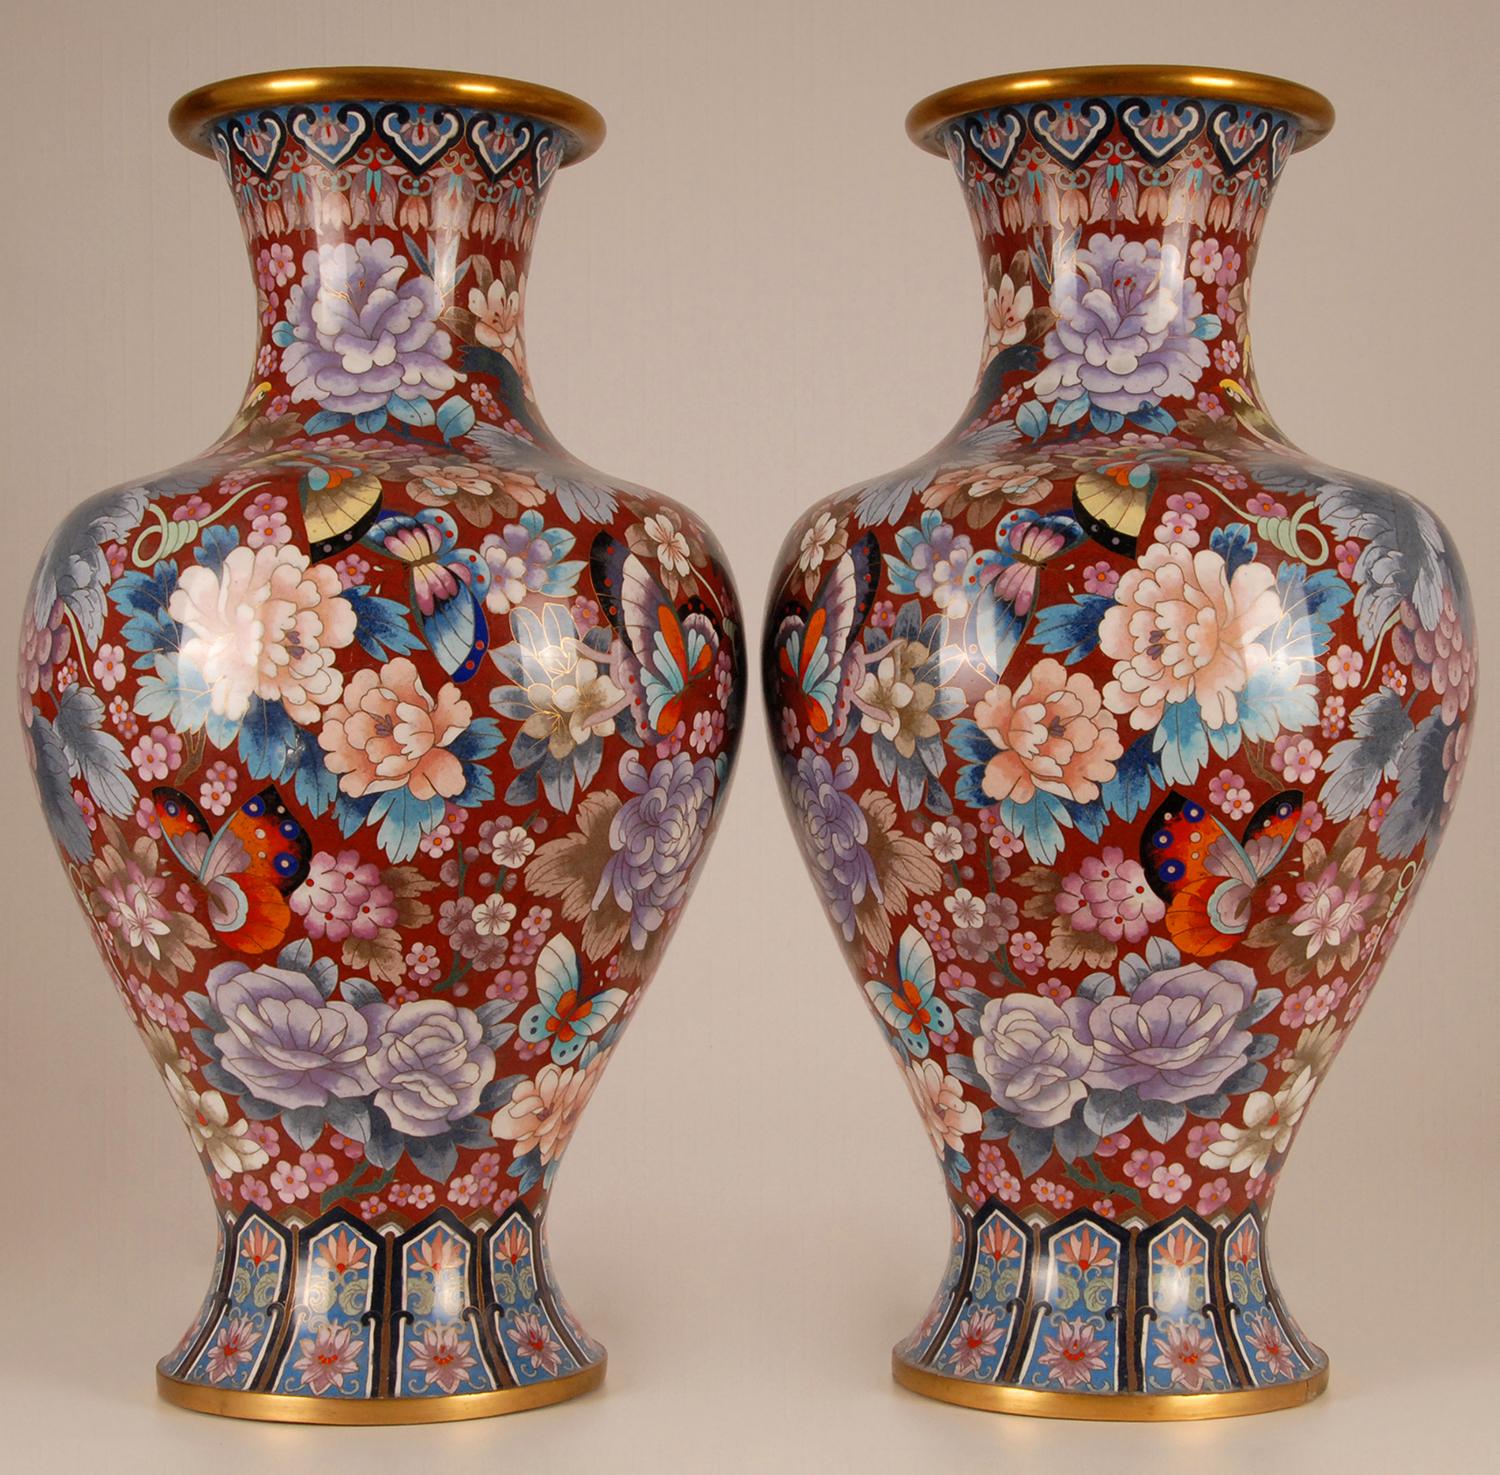 Chinese Cloisonne Gilded Bronze Baluster Vases Enameled Republic Vases a Pair For Sale 5